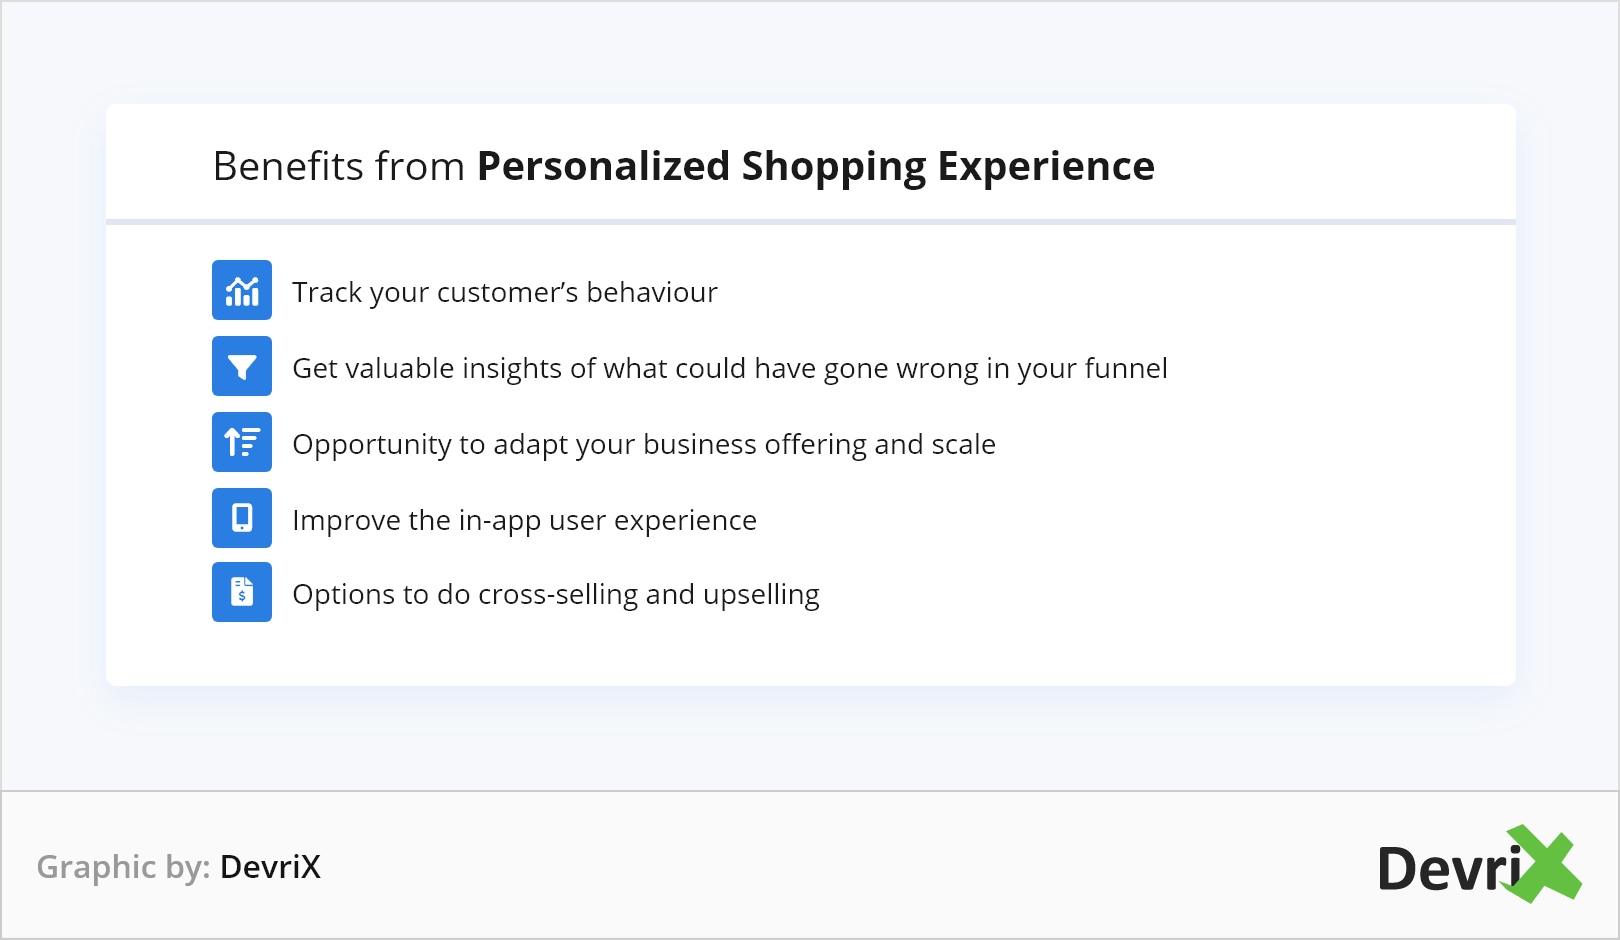 Benefits from Personalized Shopping Experience